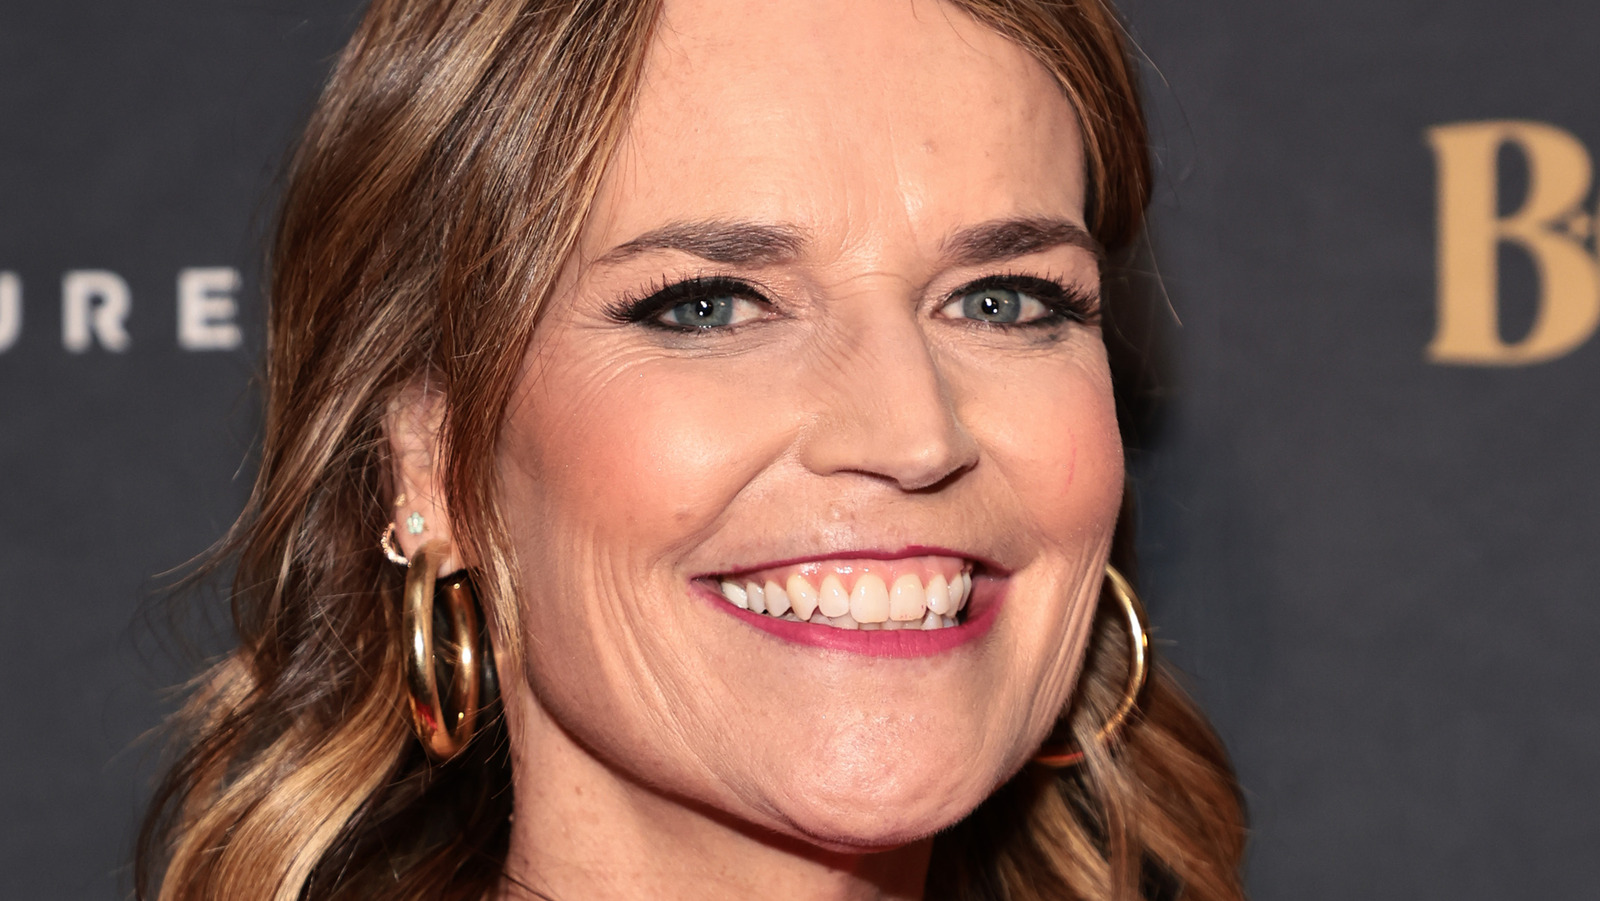 Here’s What Savannah Guthrie Really Looks Like Without Makeup